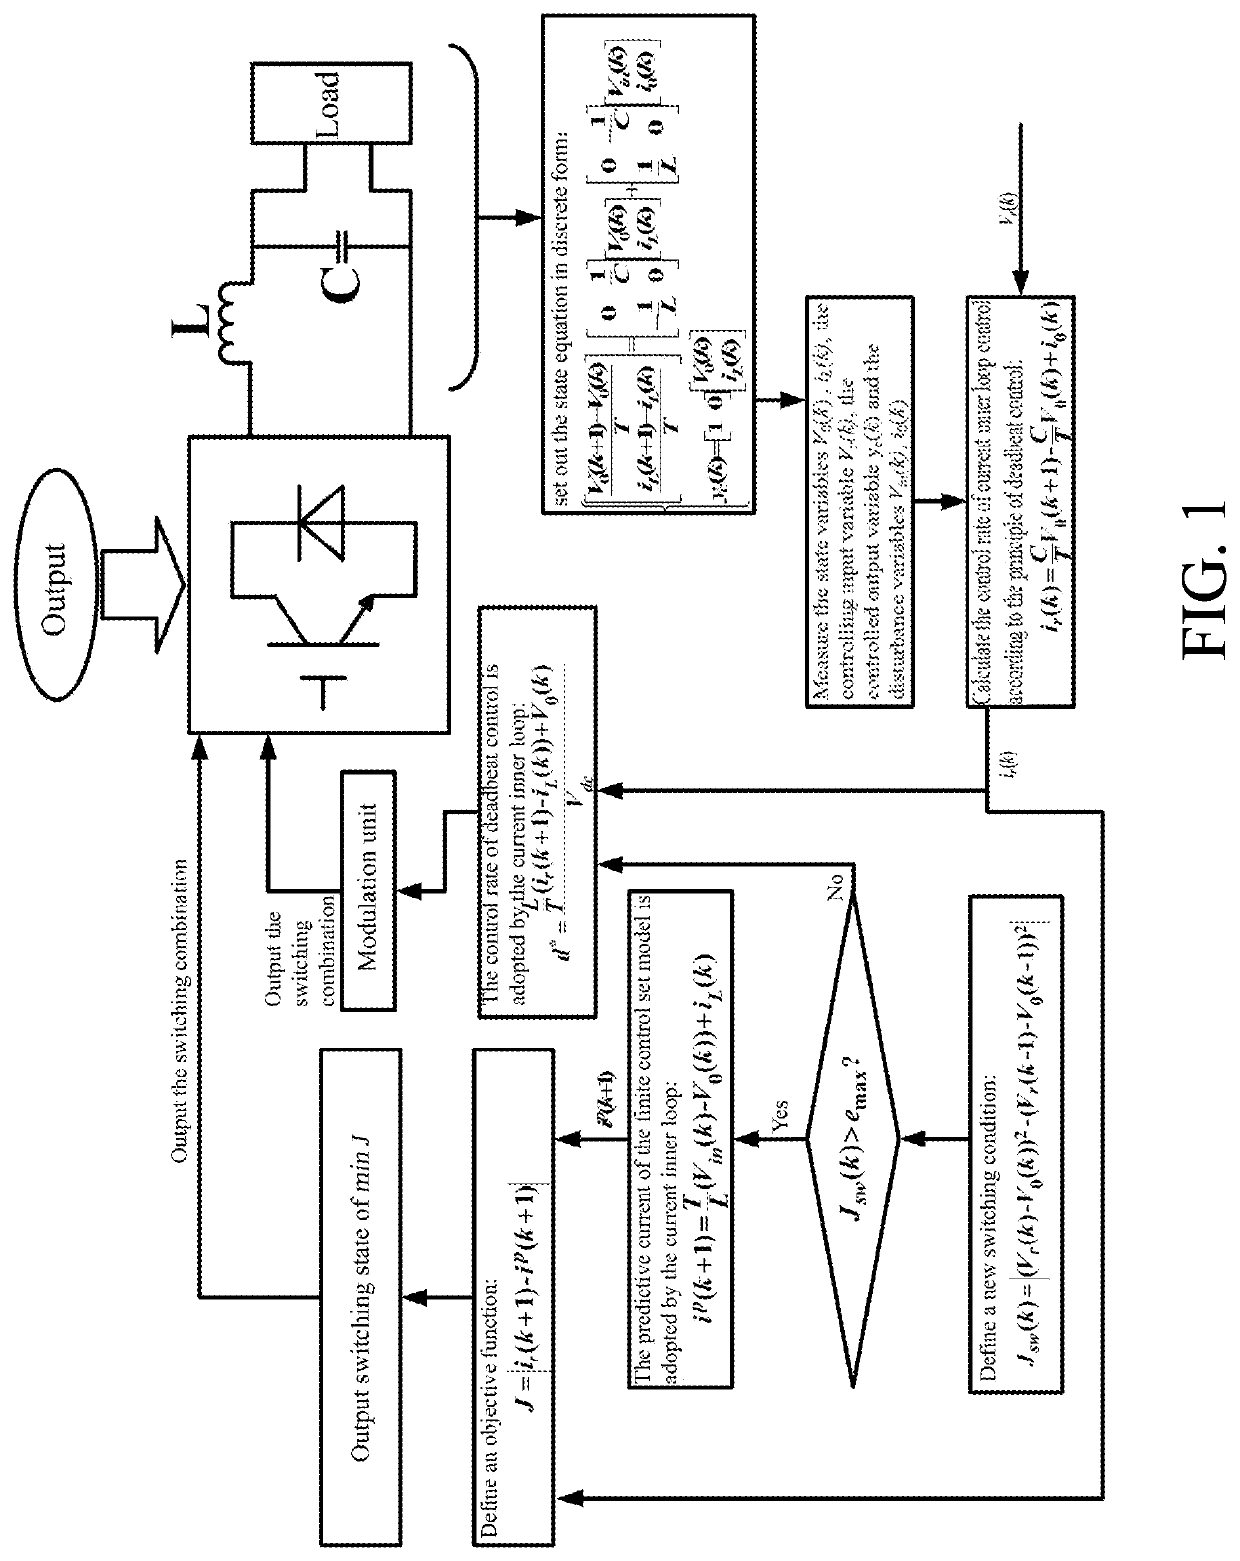 Switching type control method based on double loop predictive control